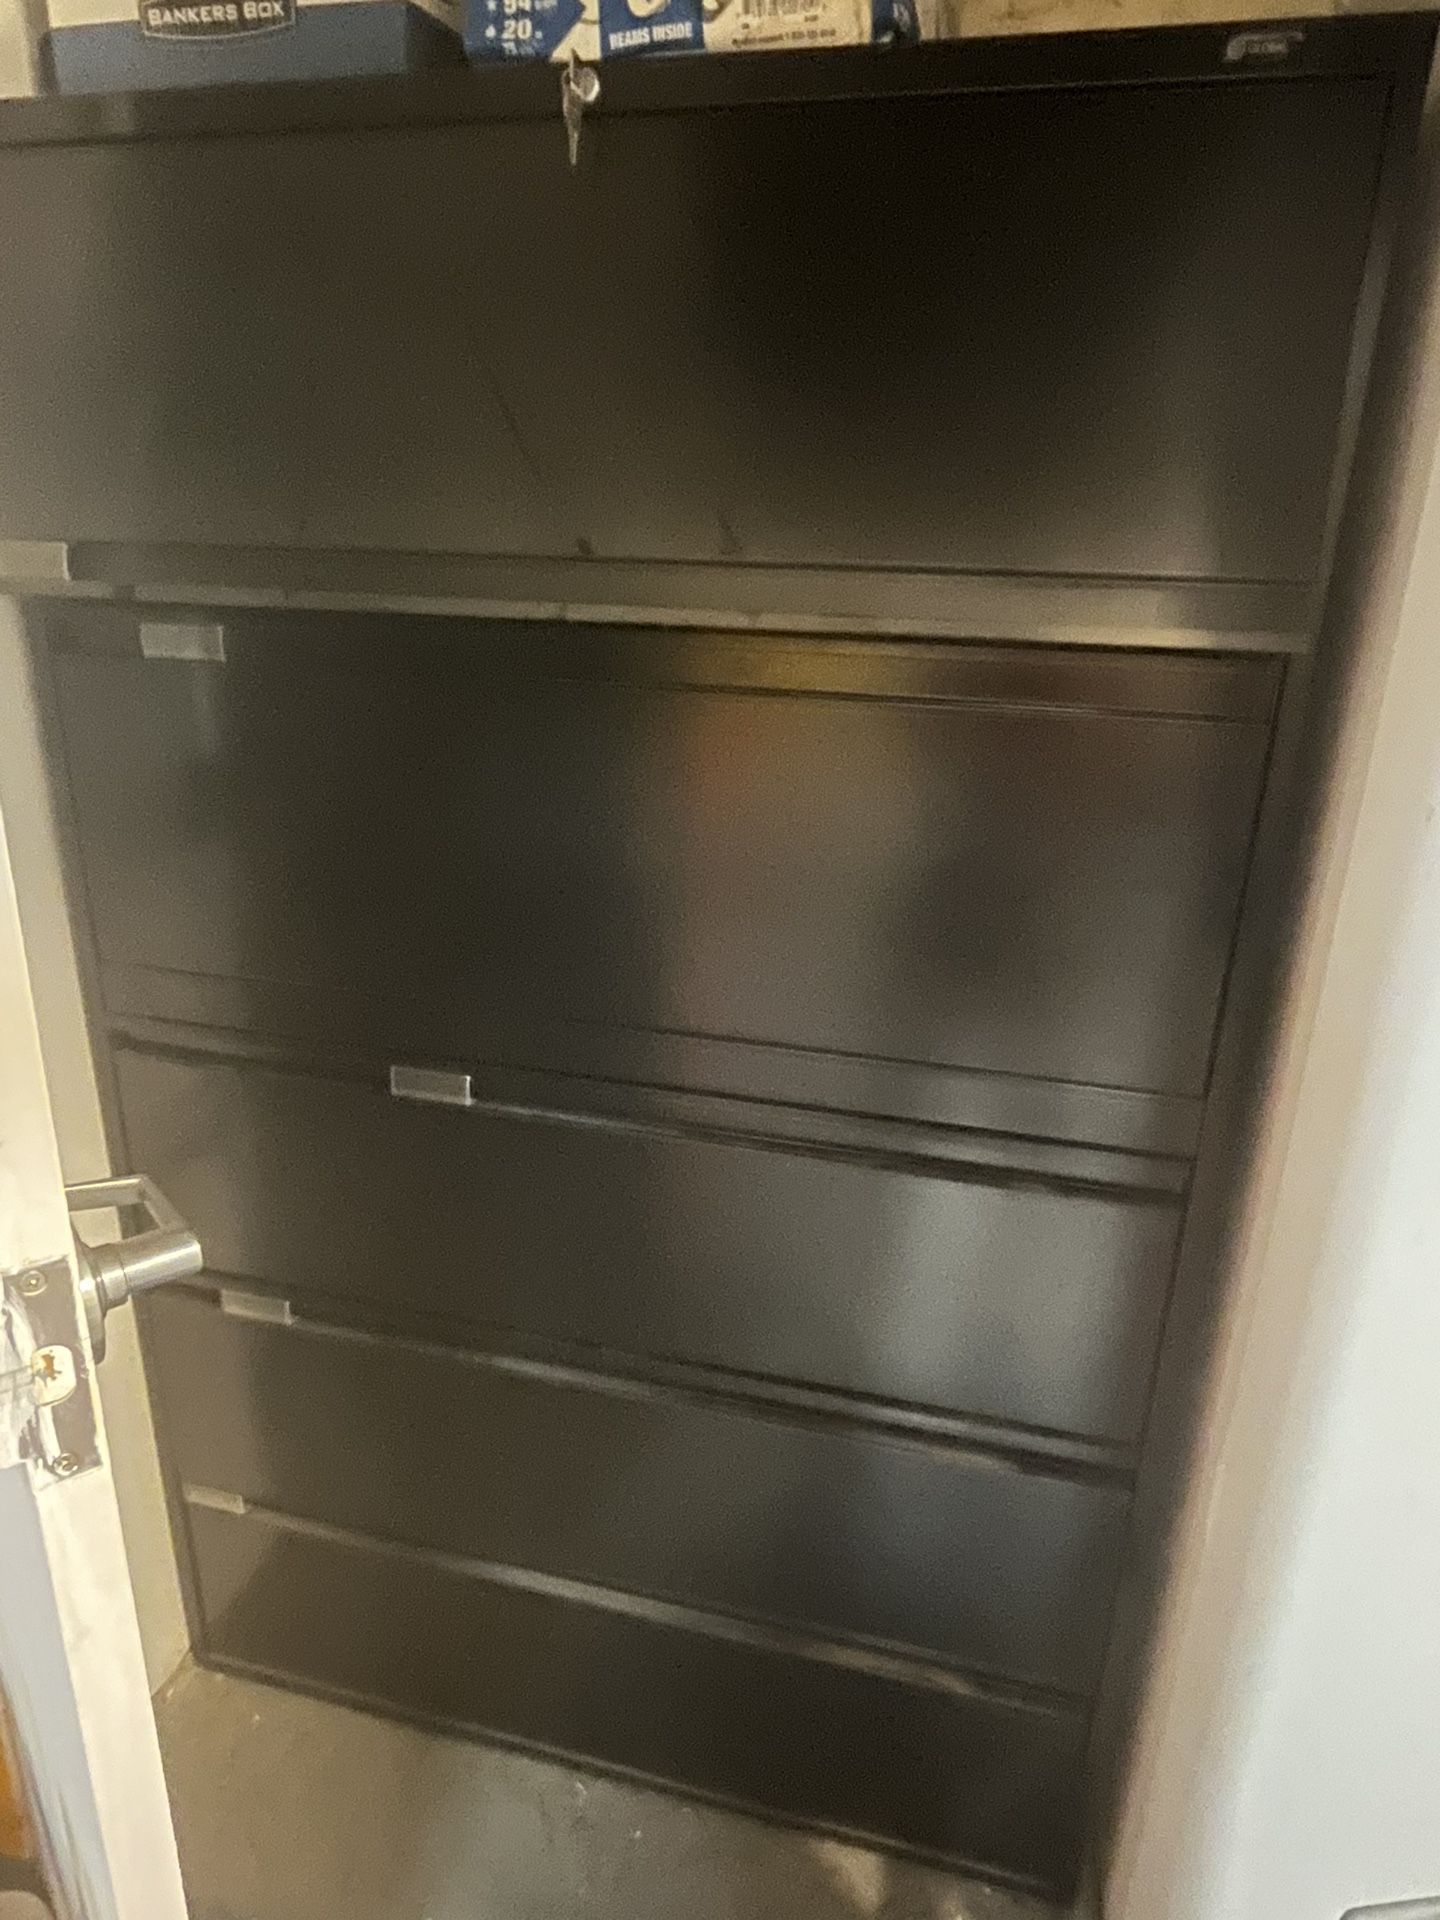 Large Filing Cabinets - $110 Each, Cash Only 